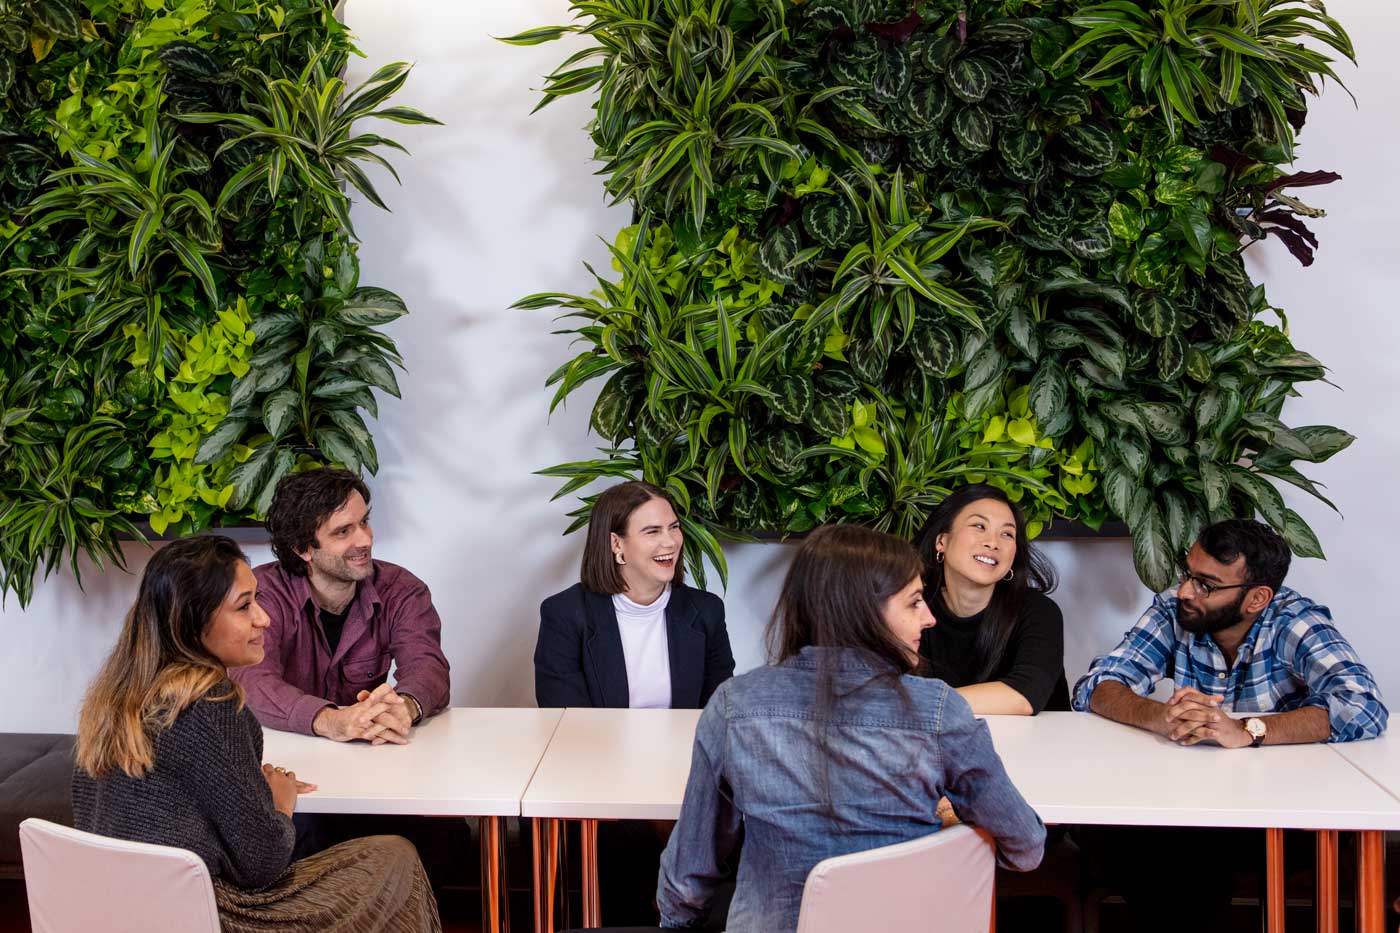 Six colleagues sit together around a table, talking and laughing in front of a plant wall in one of the town squares.